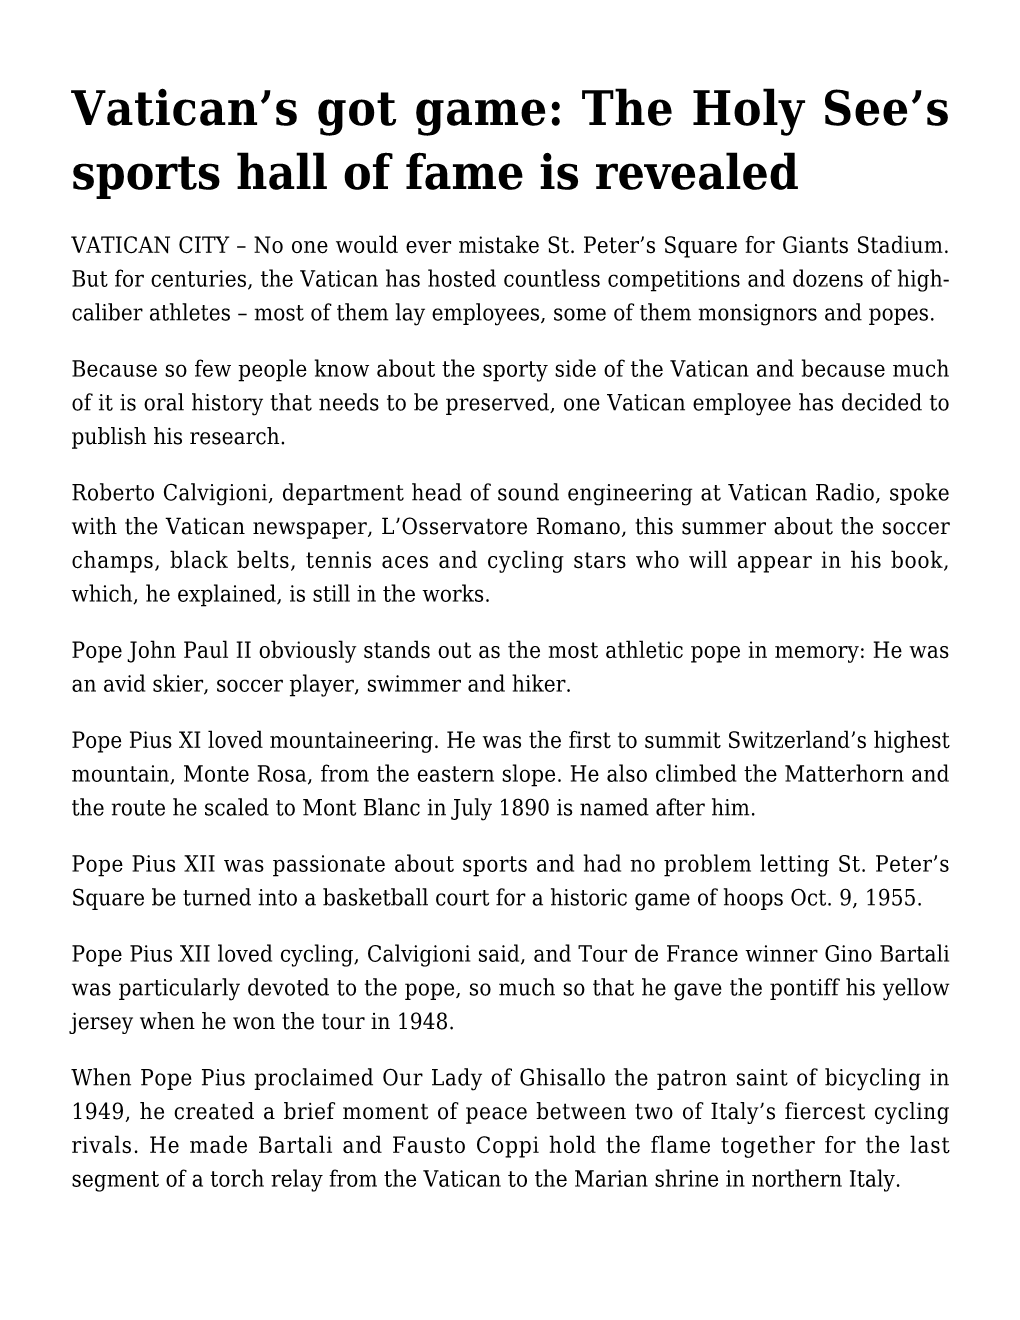 Vatican's Got Game: the Holy See's Sports Hall of Fame Is Revealed